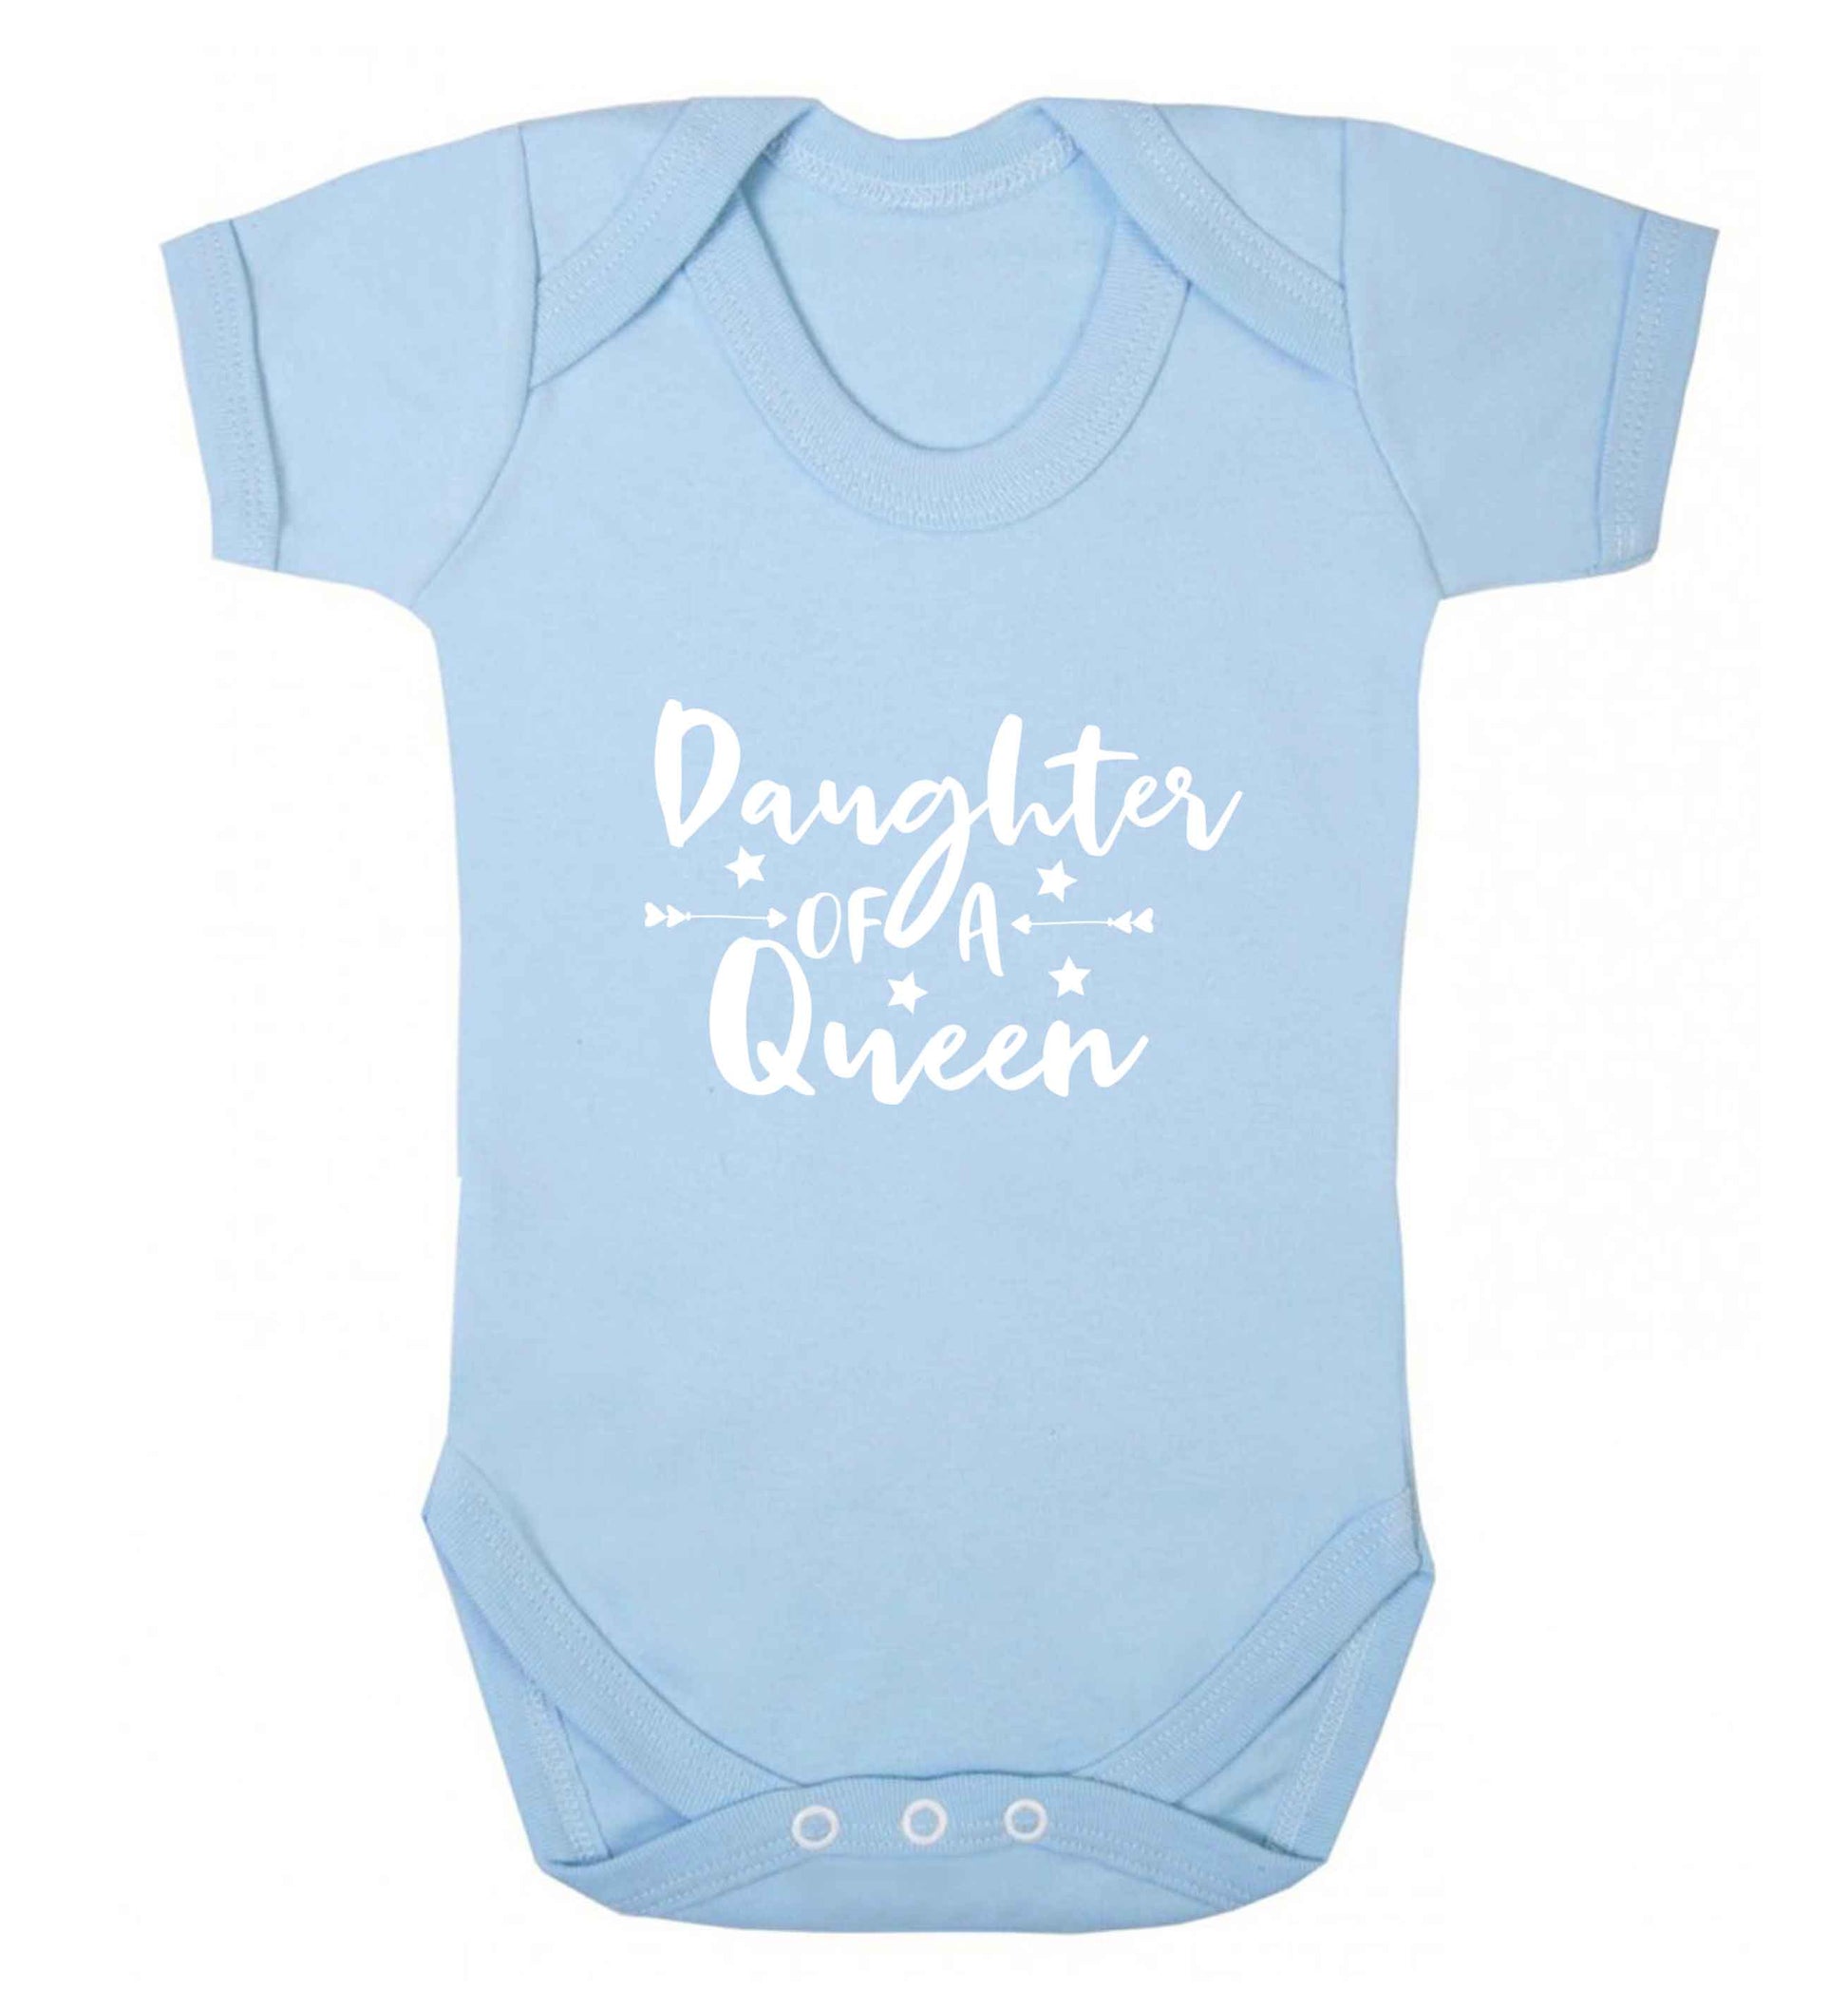 Daughter of a Queen baby vest pale blue 18-24 months